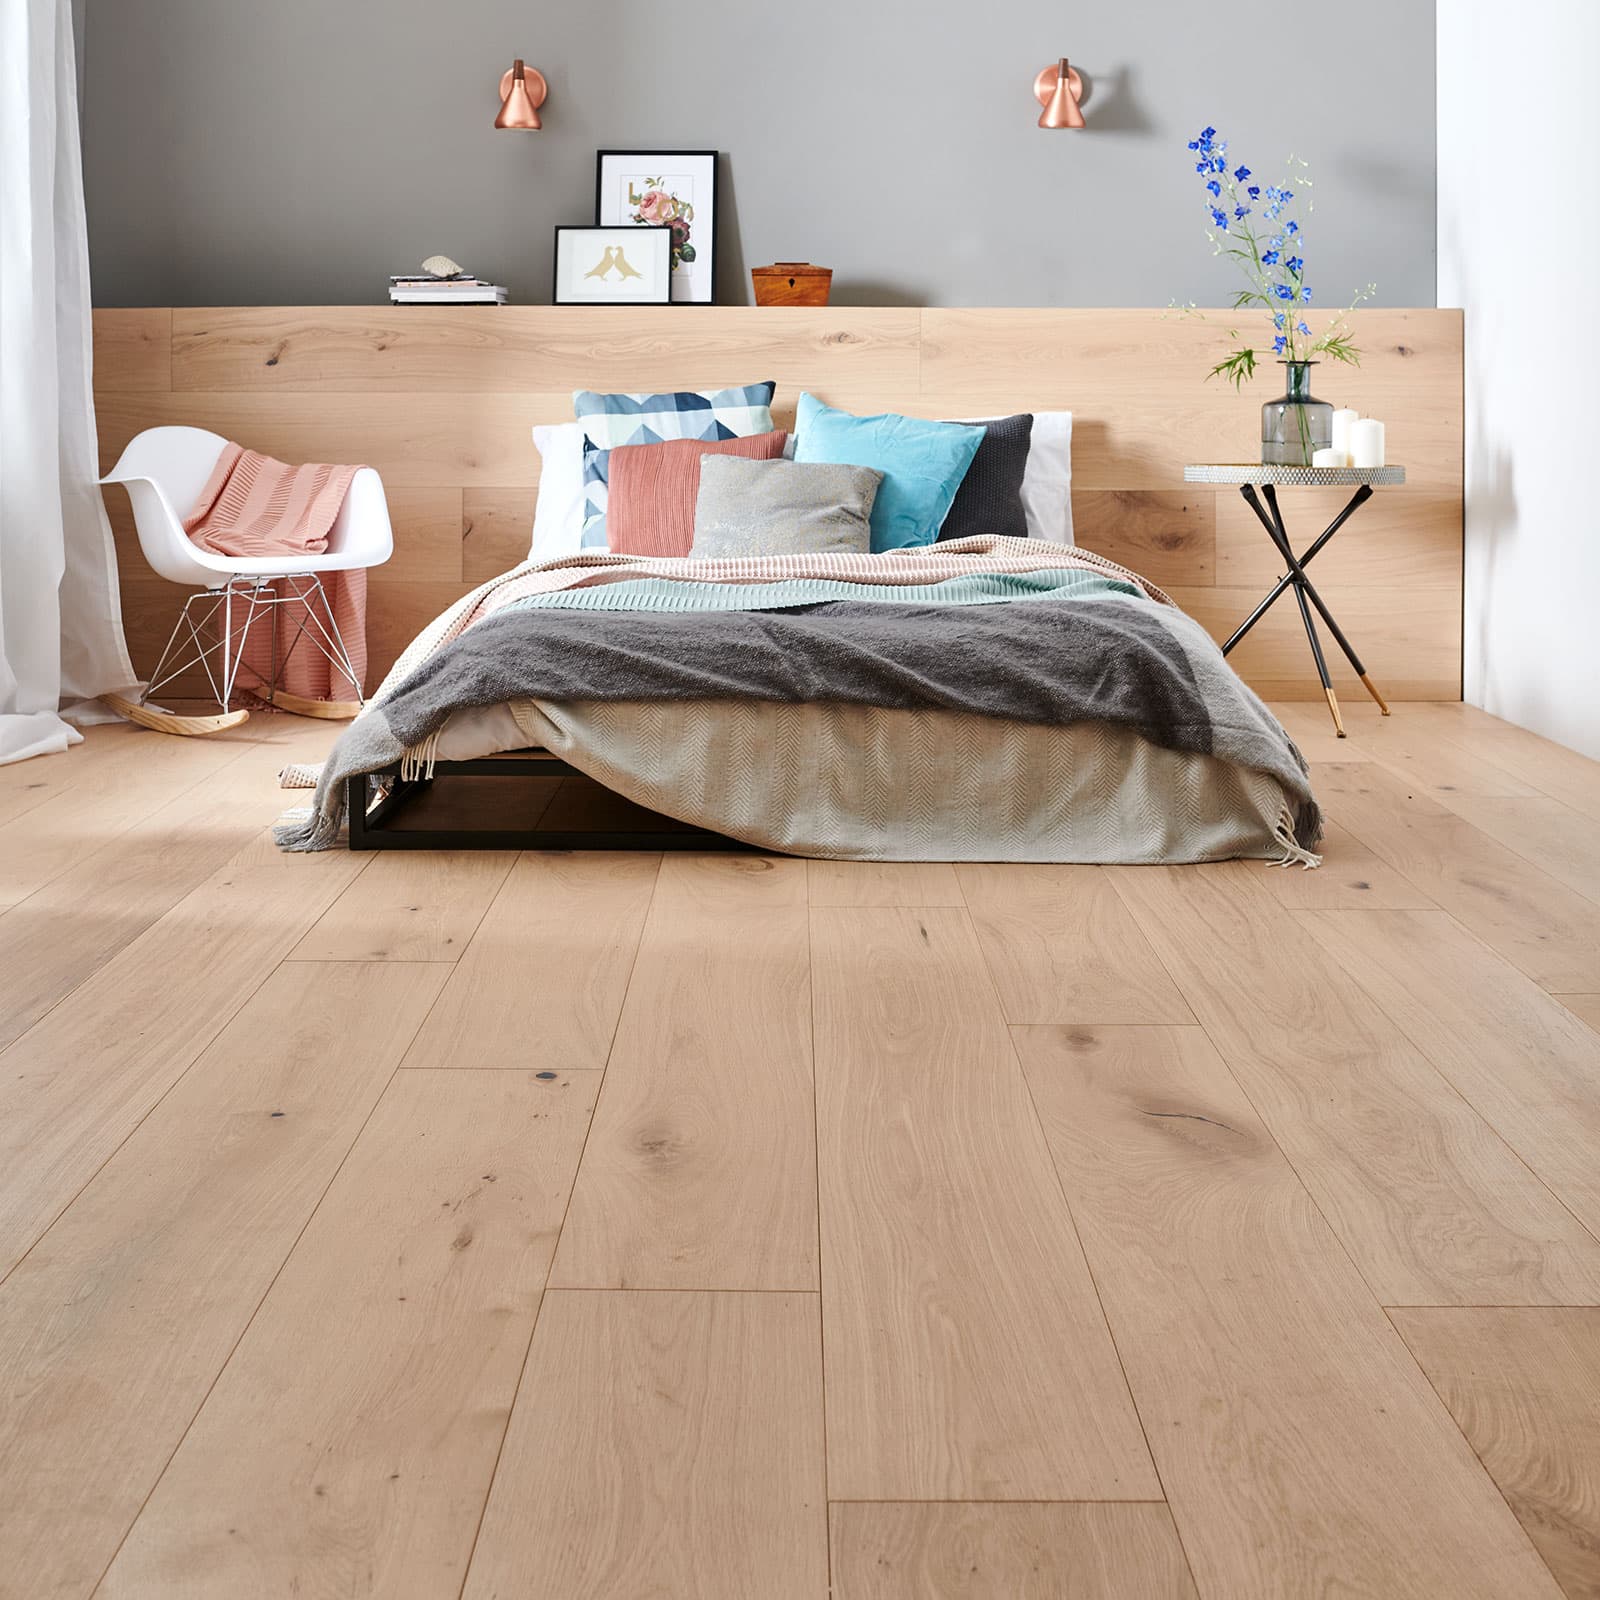 Wood Floors Adding Value To Your Home Woodpecker Flooring